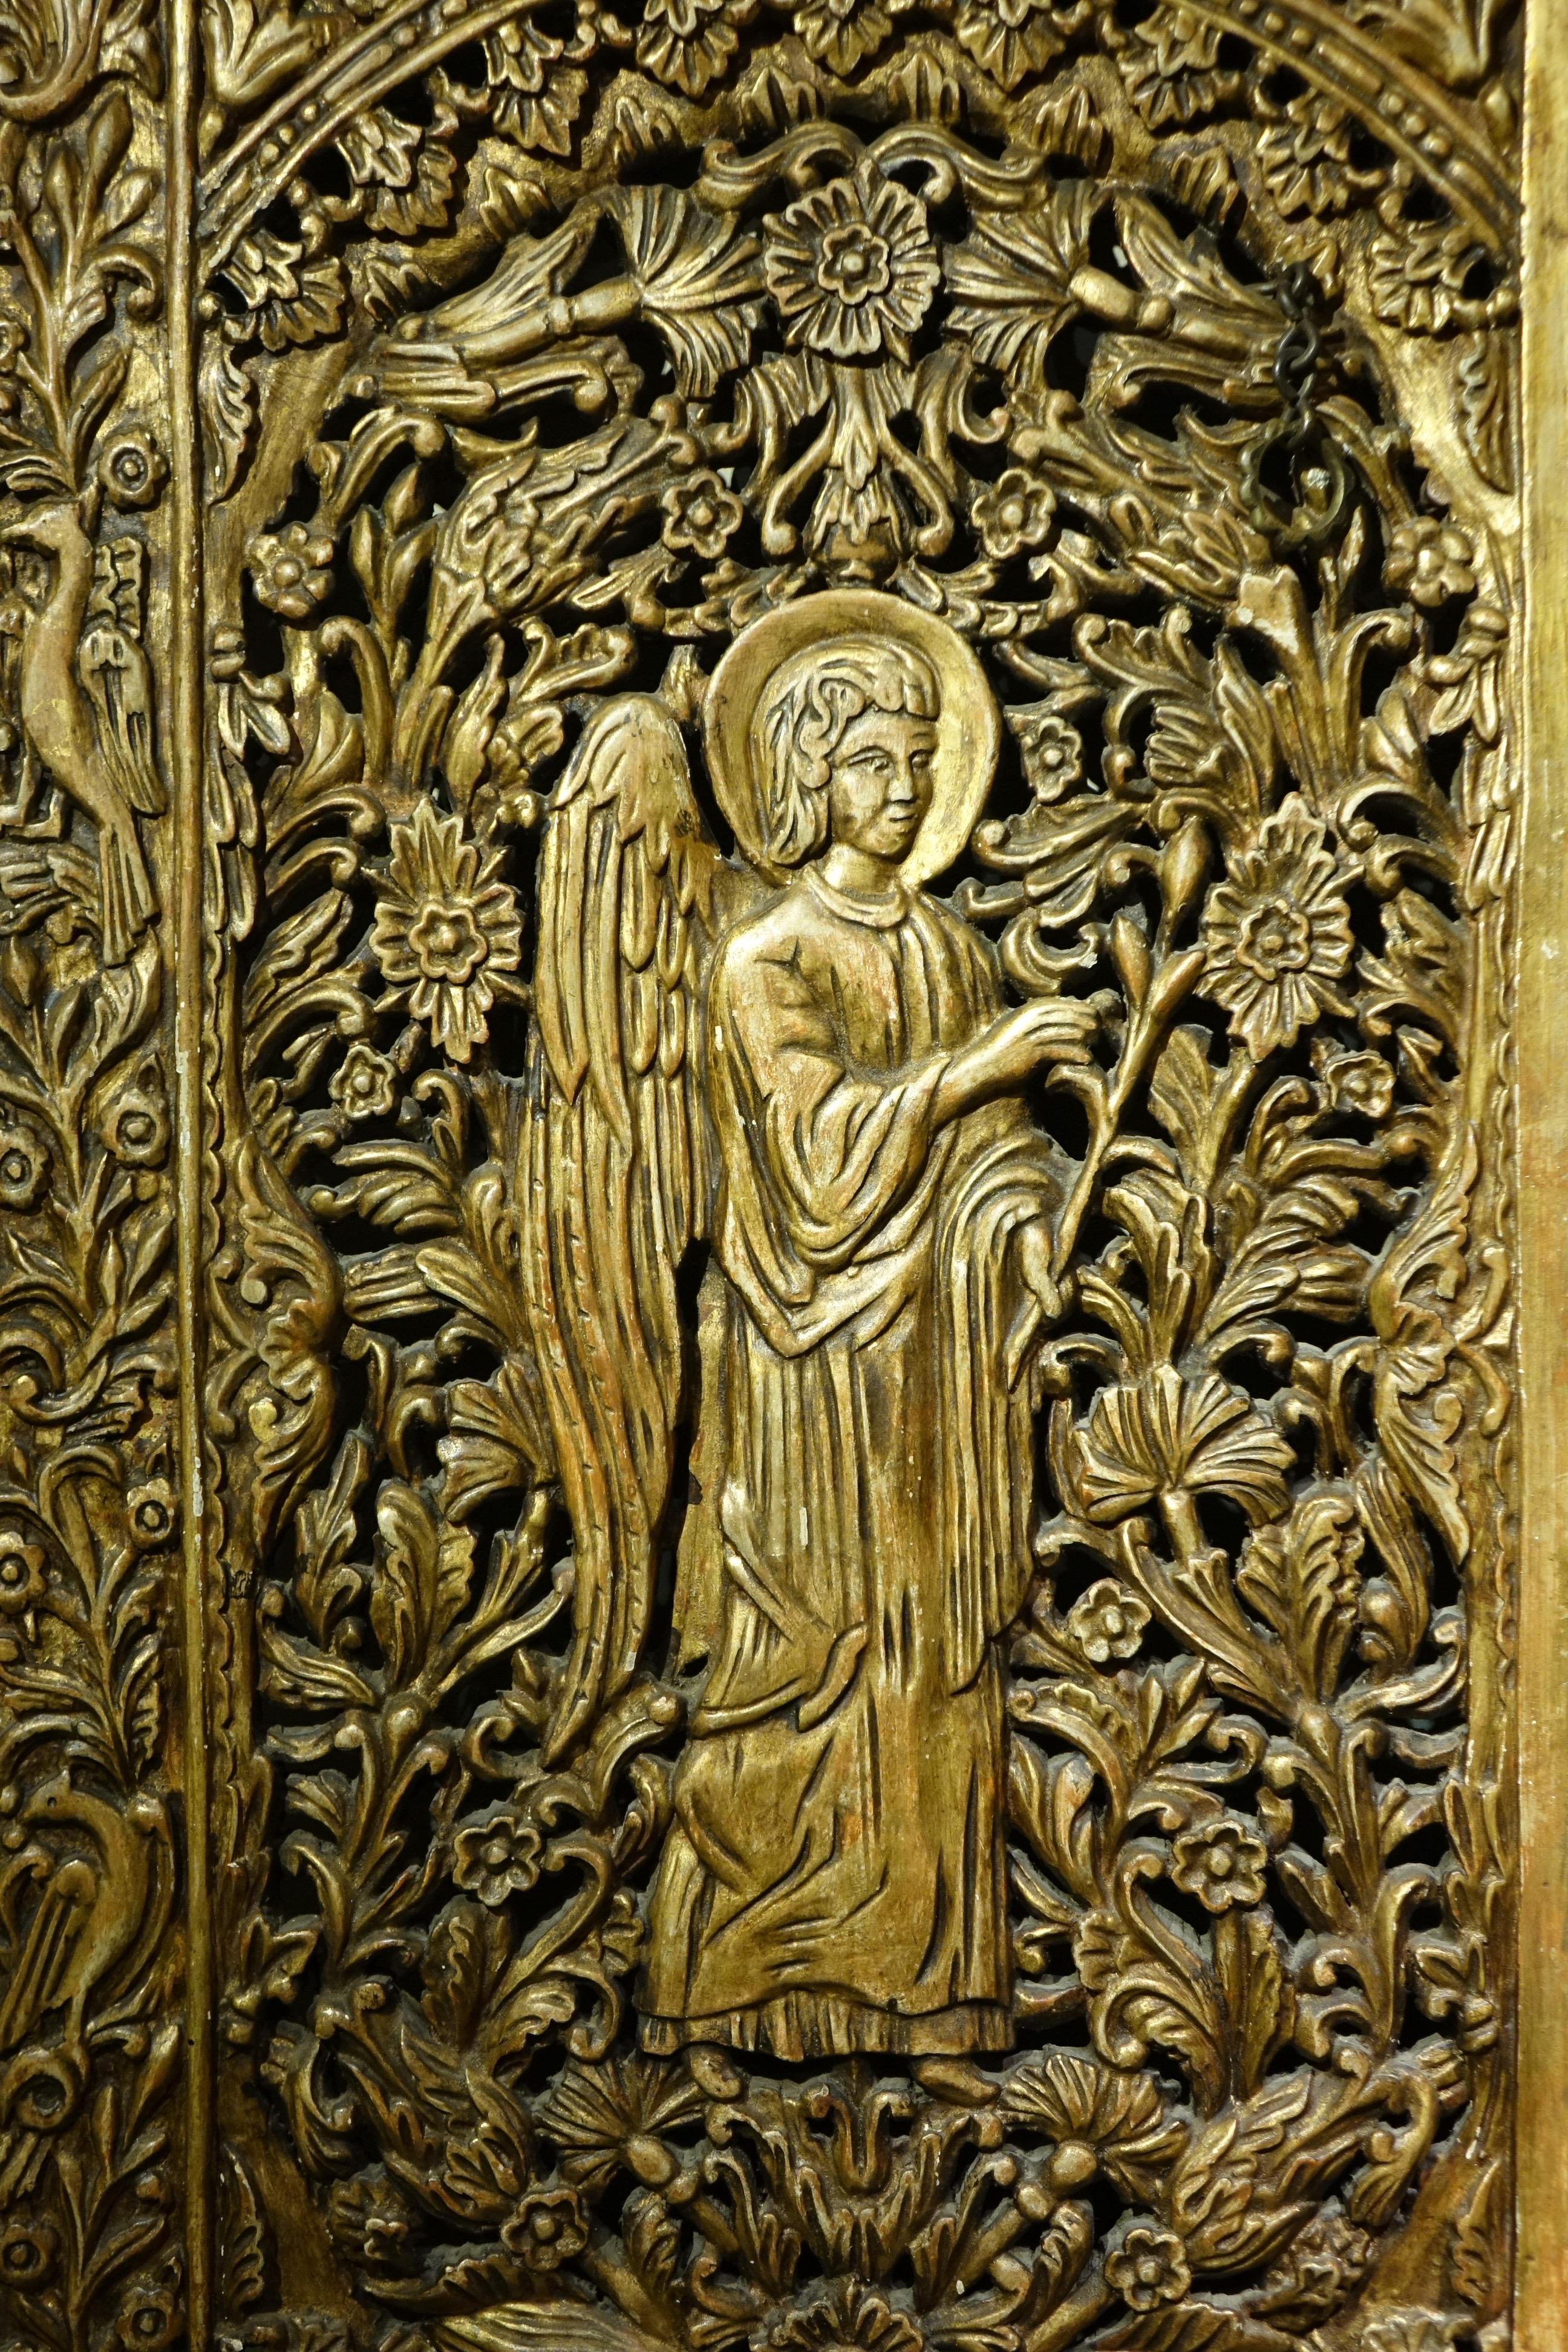 Carved and gilt wood door from an iconostasis representing the Annunciation to Mary by the archangel Gabriel.
The word 